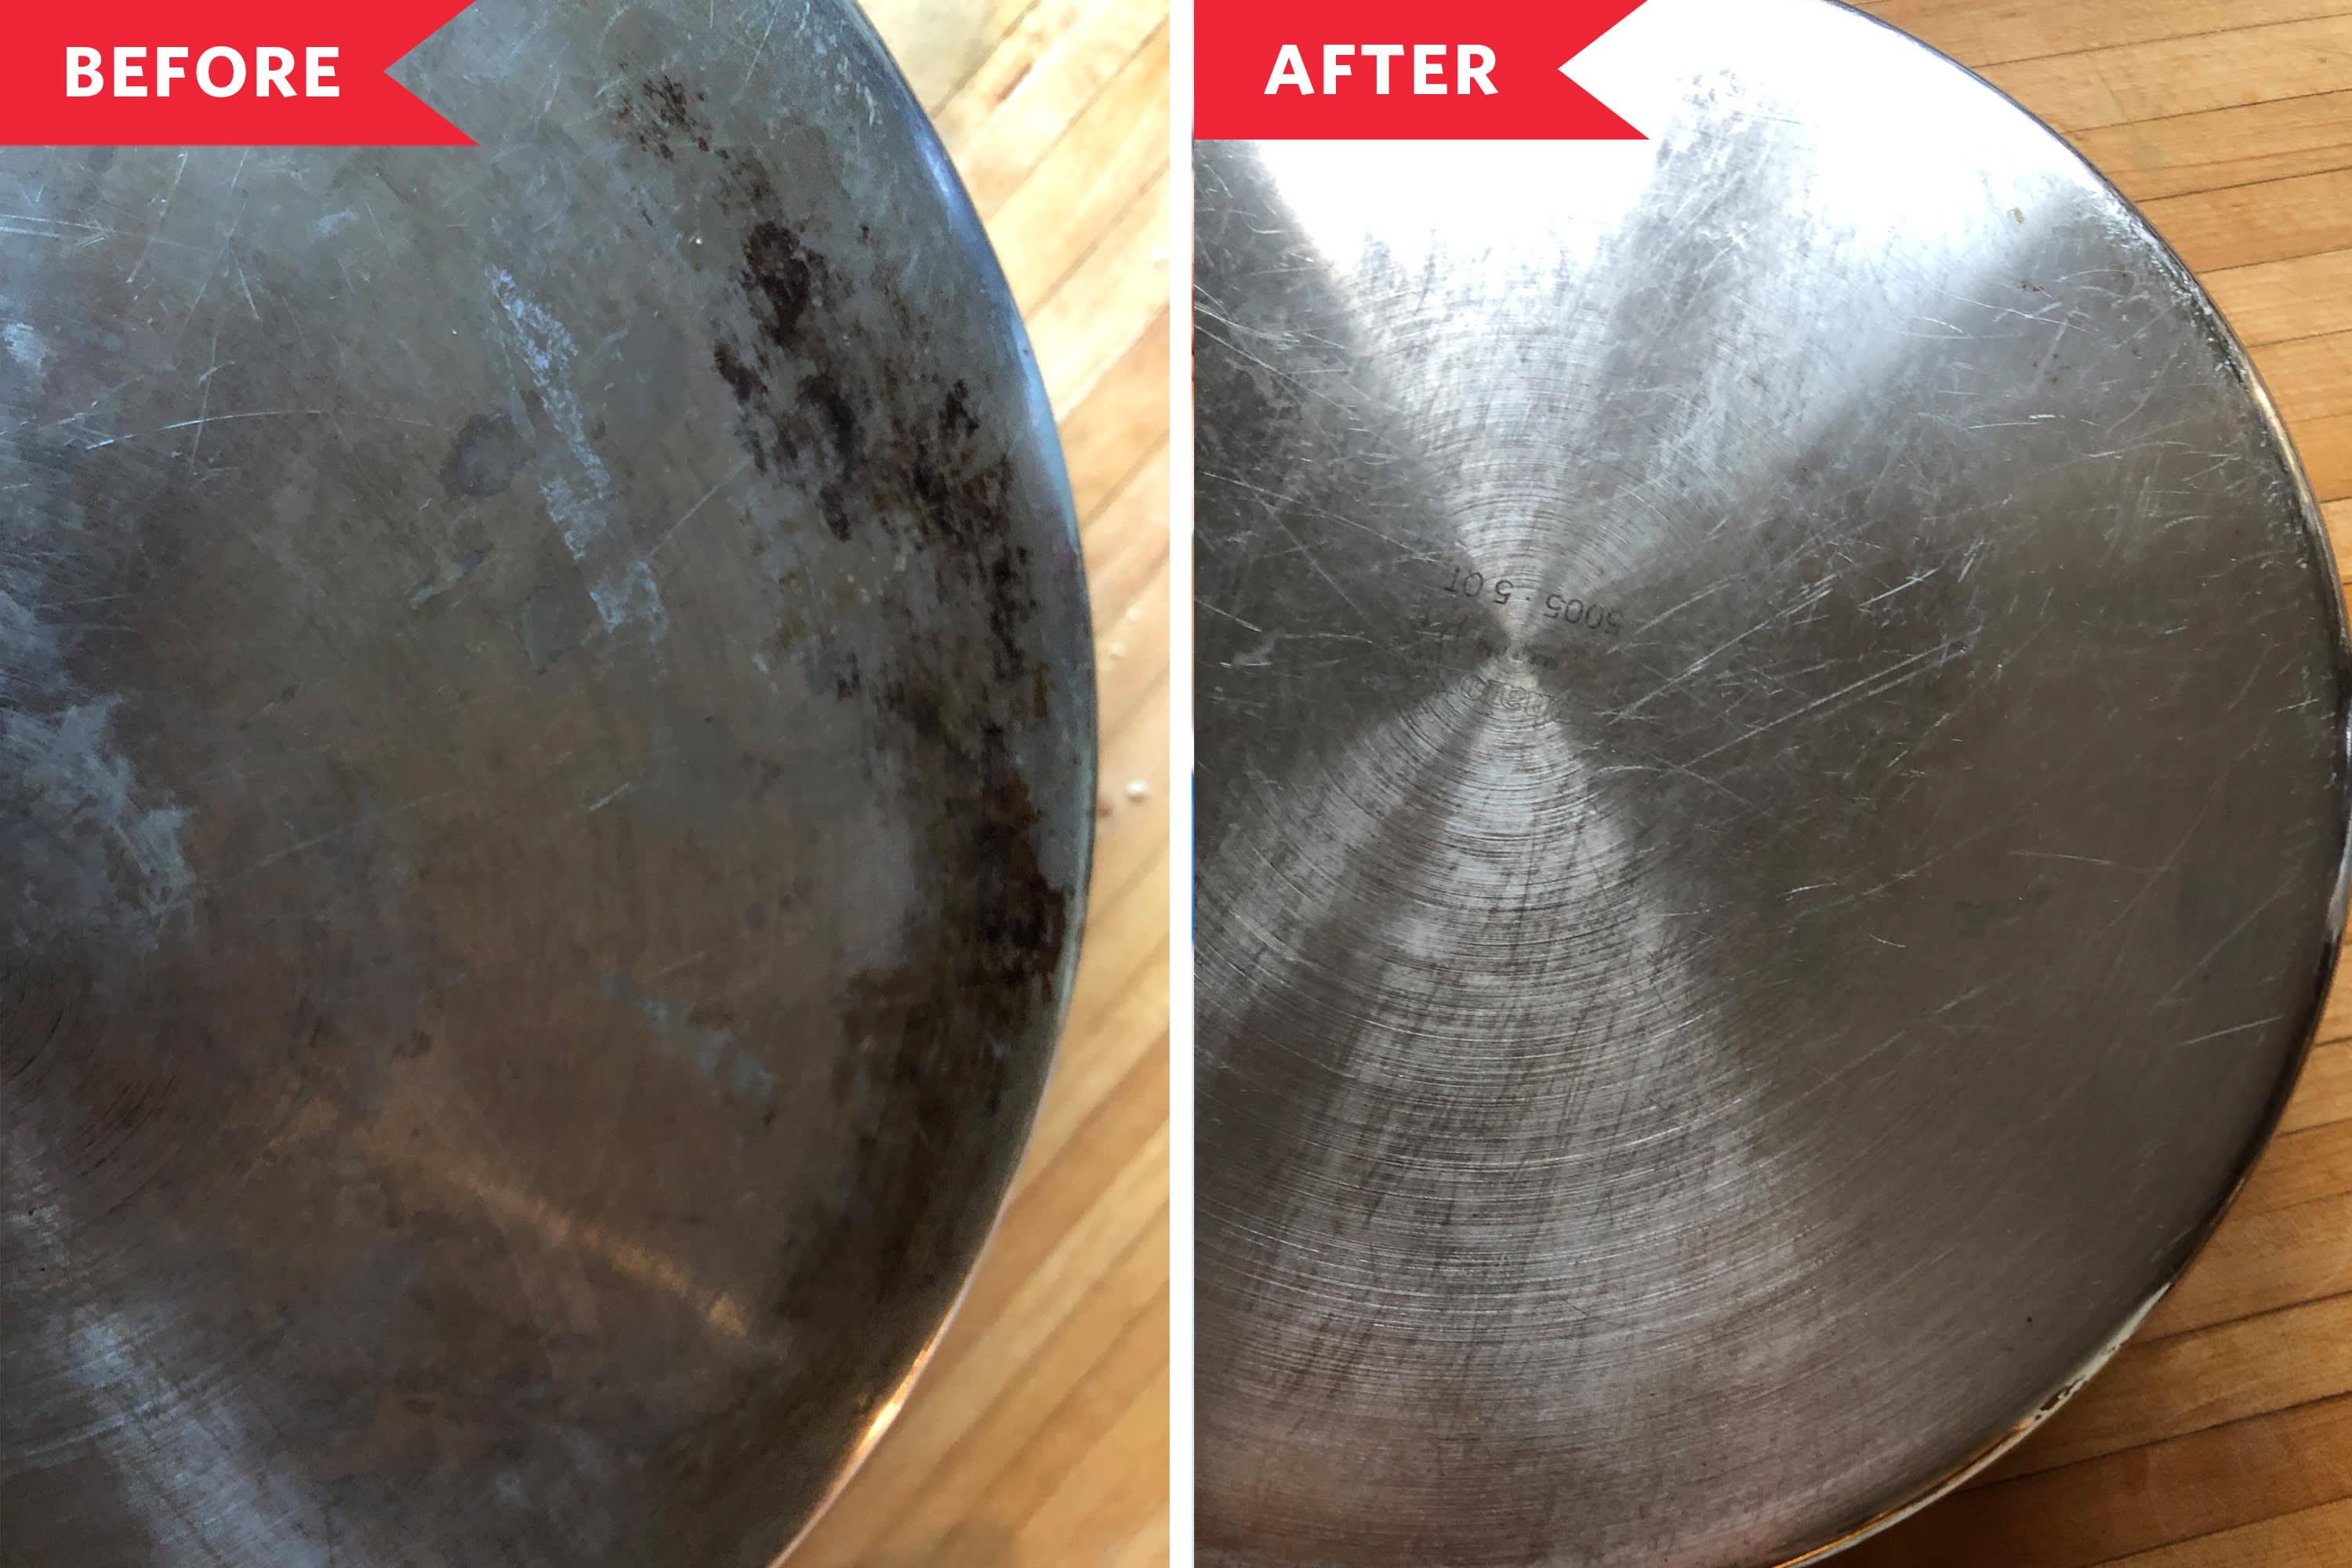 A Review of All-Clad's Stainless Steel and Aluminum Cleaner and